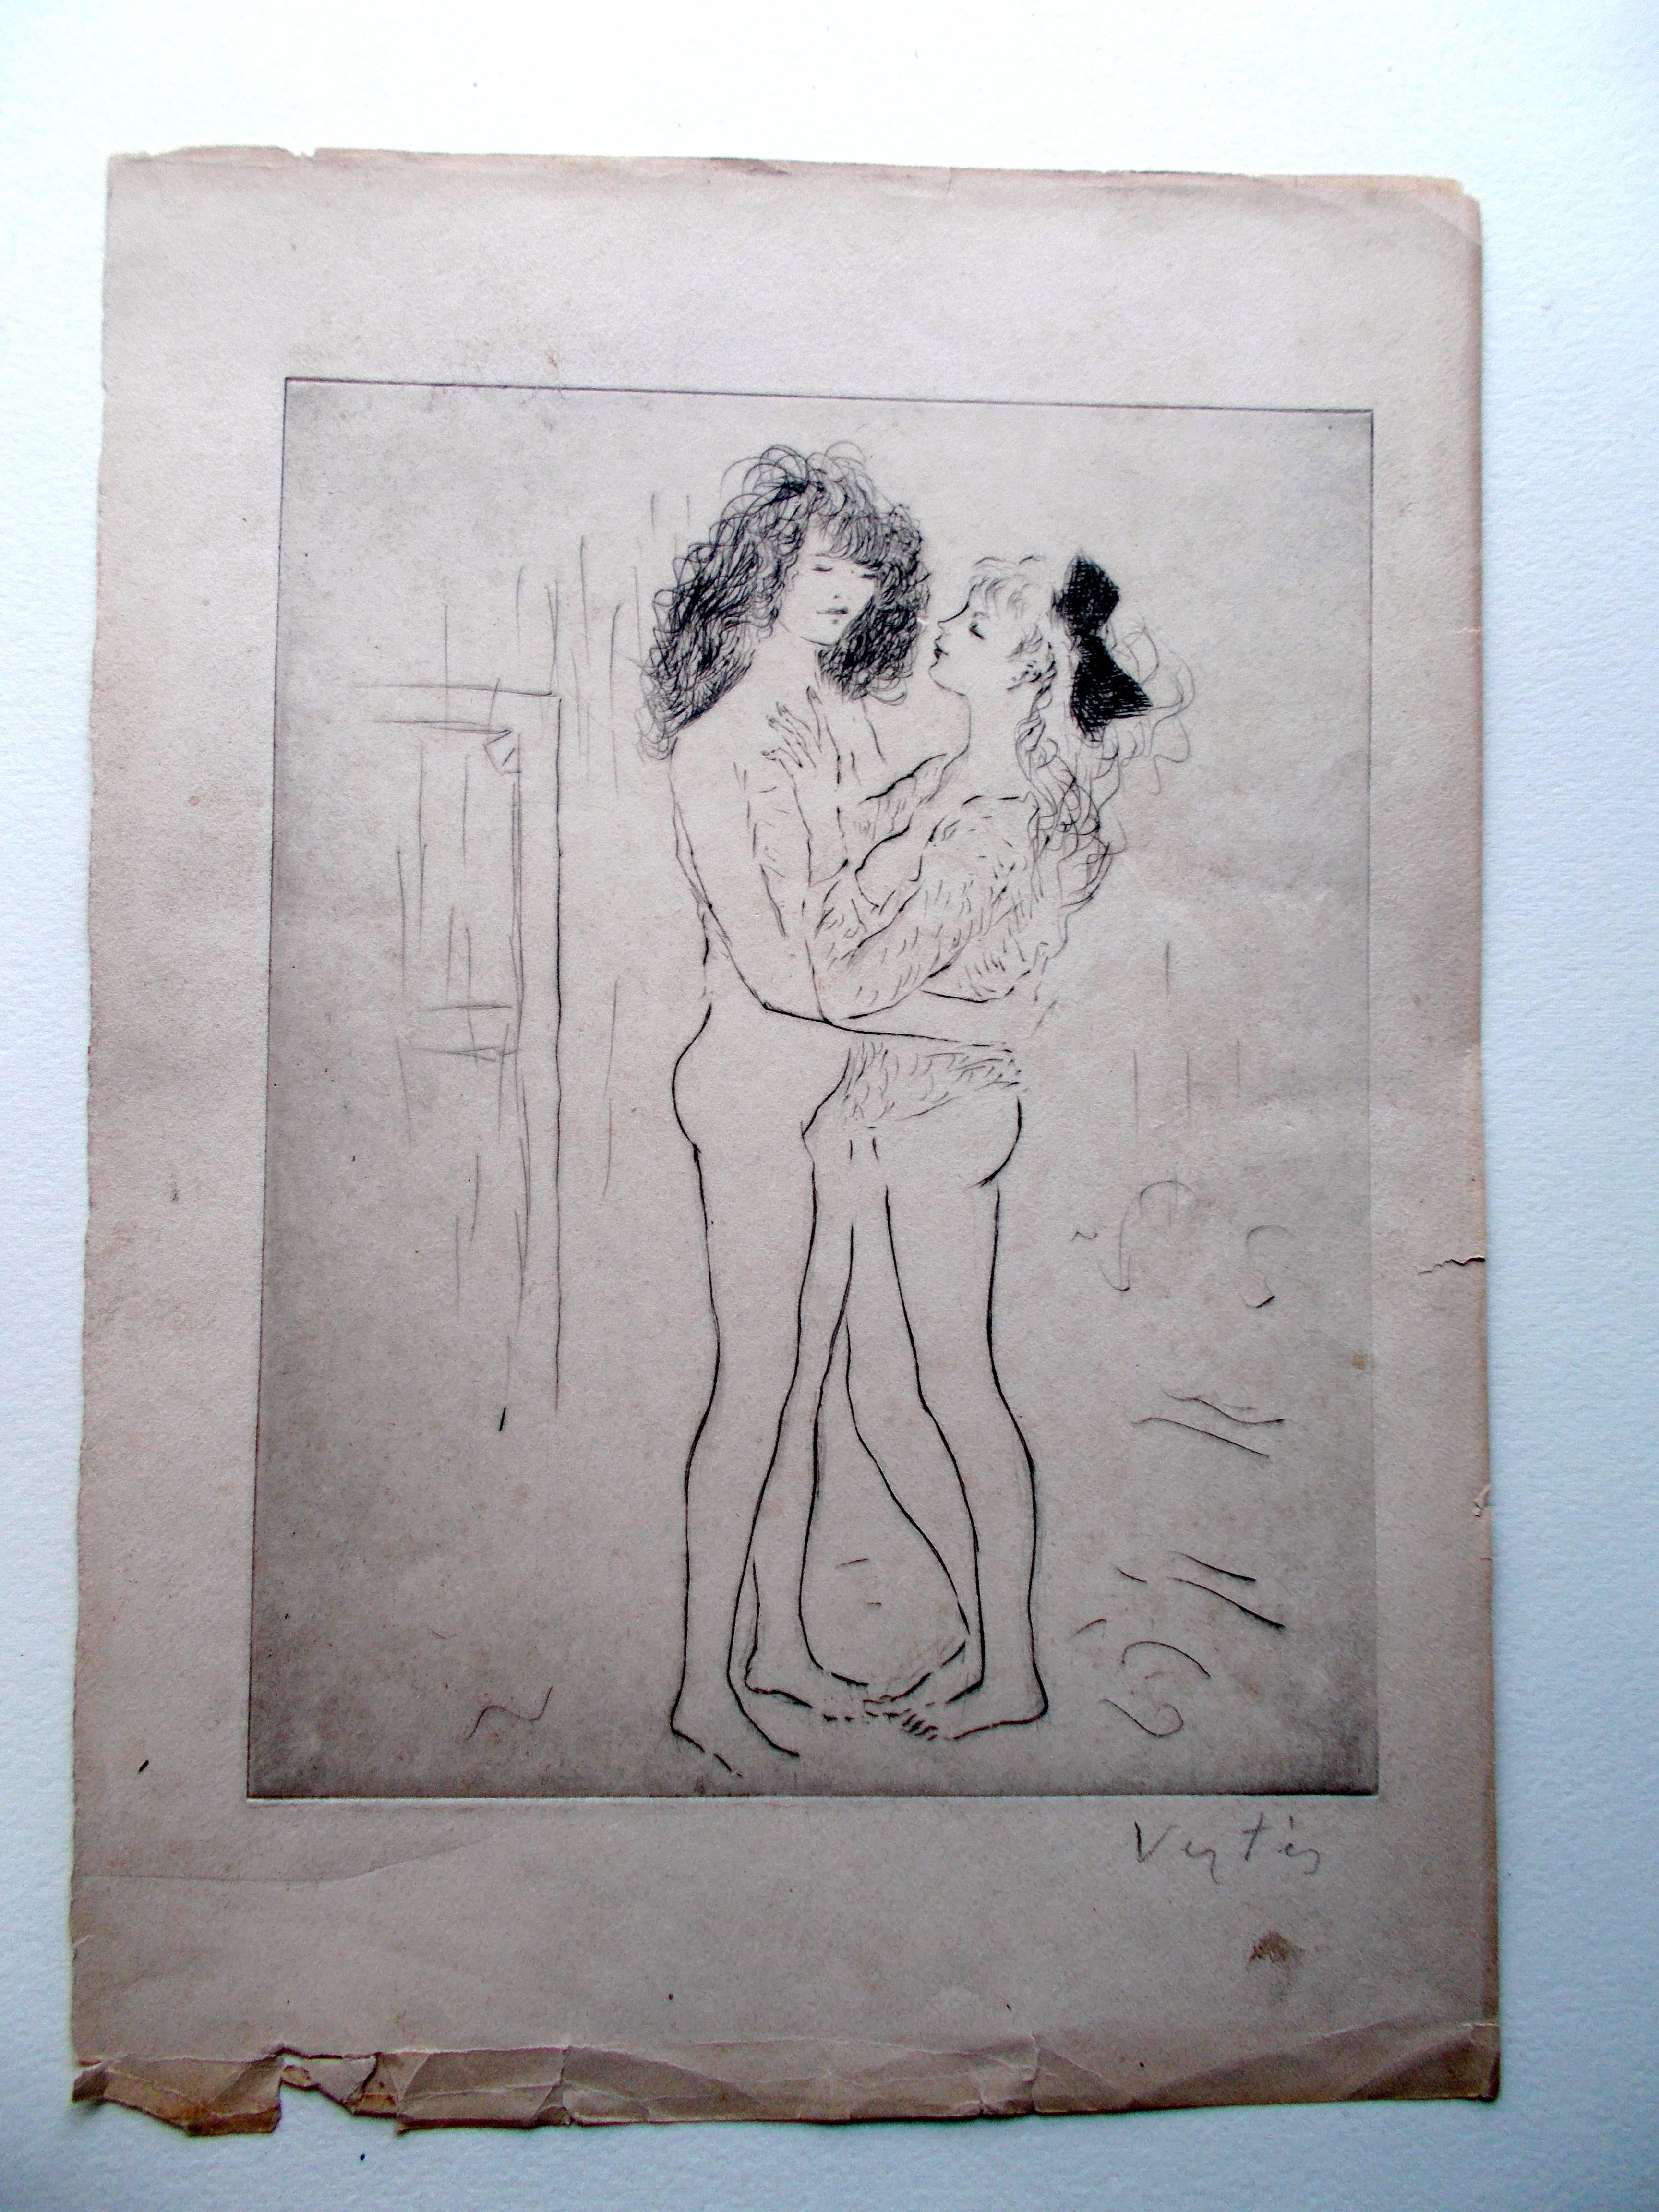 Signed etching of an embracing couple. Unframed. Plate size 9 7/8